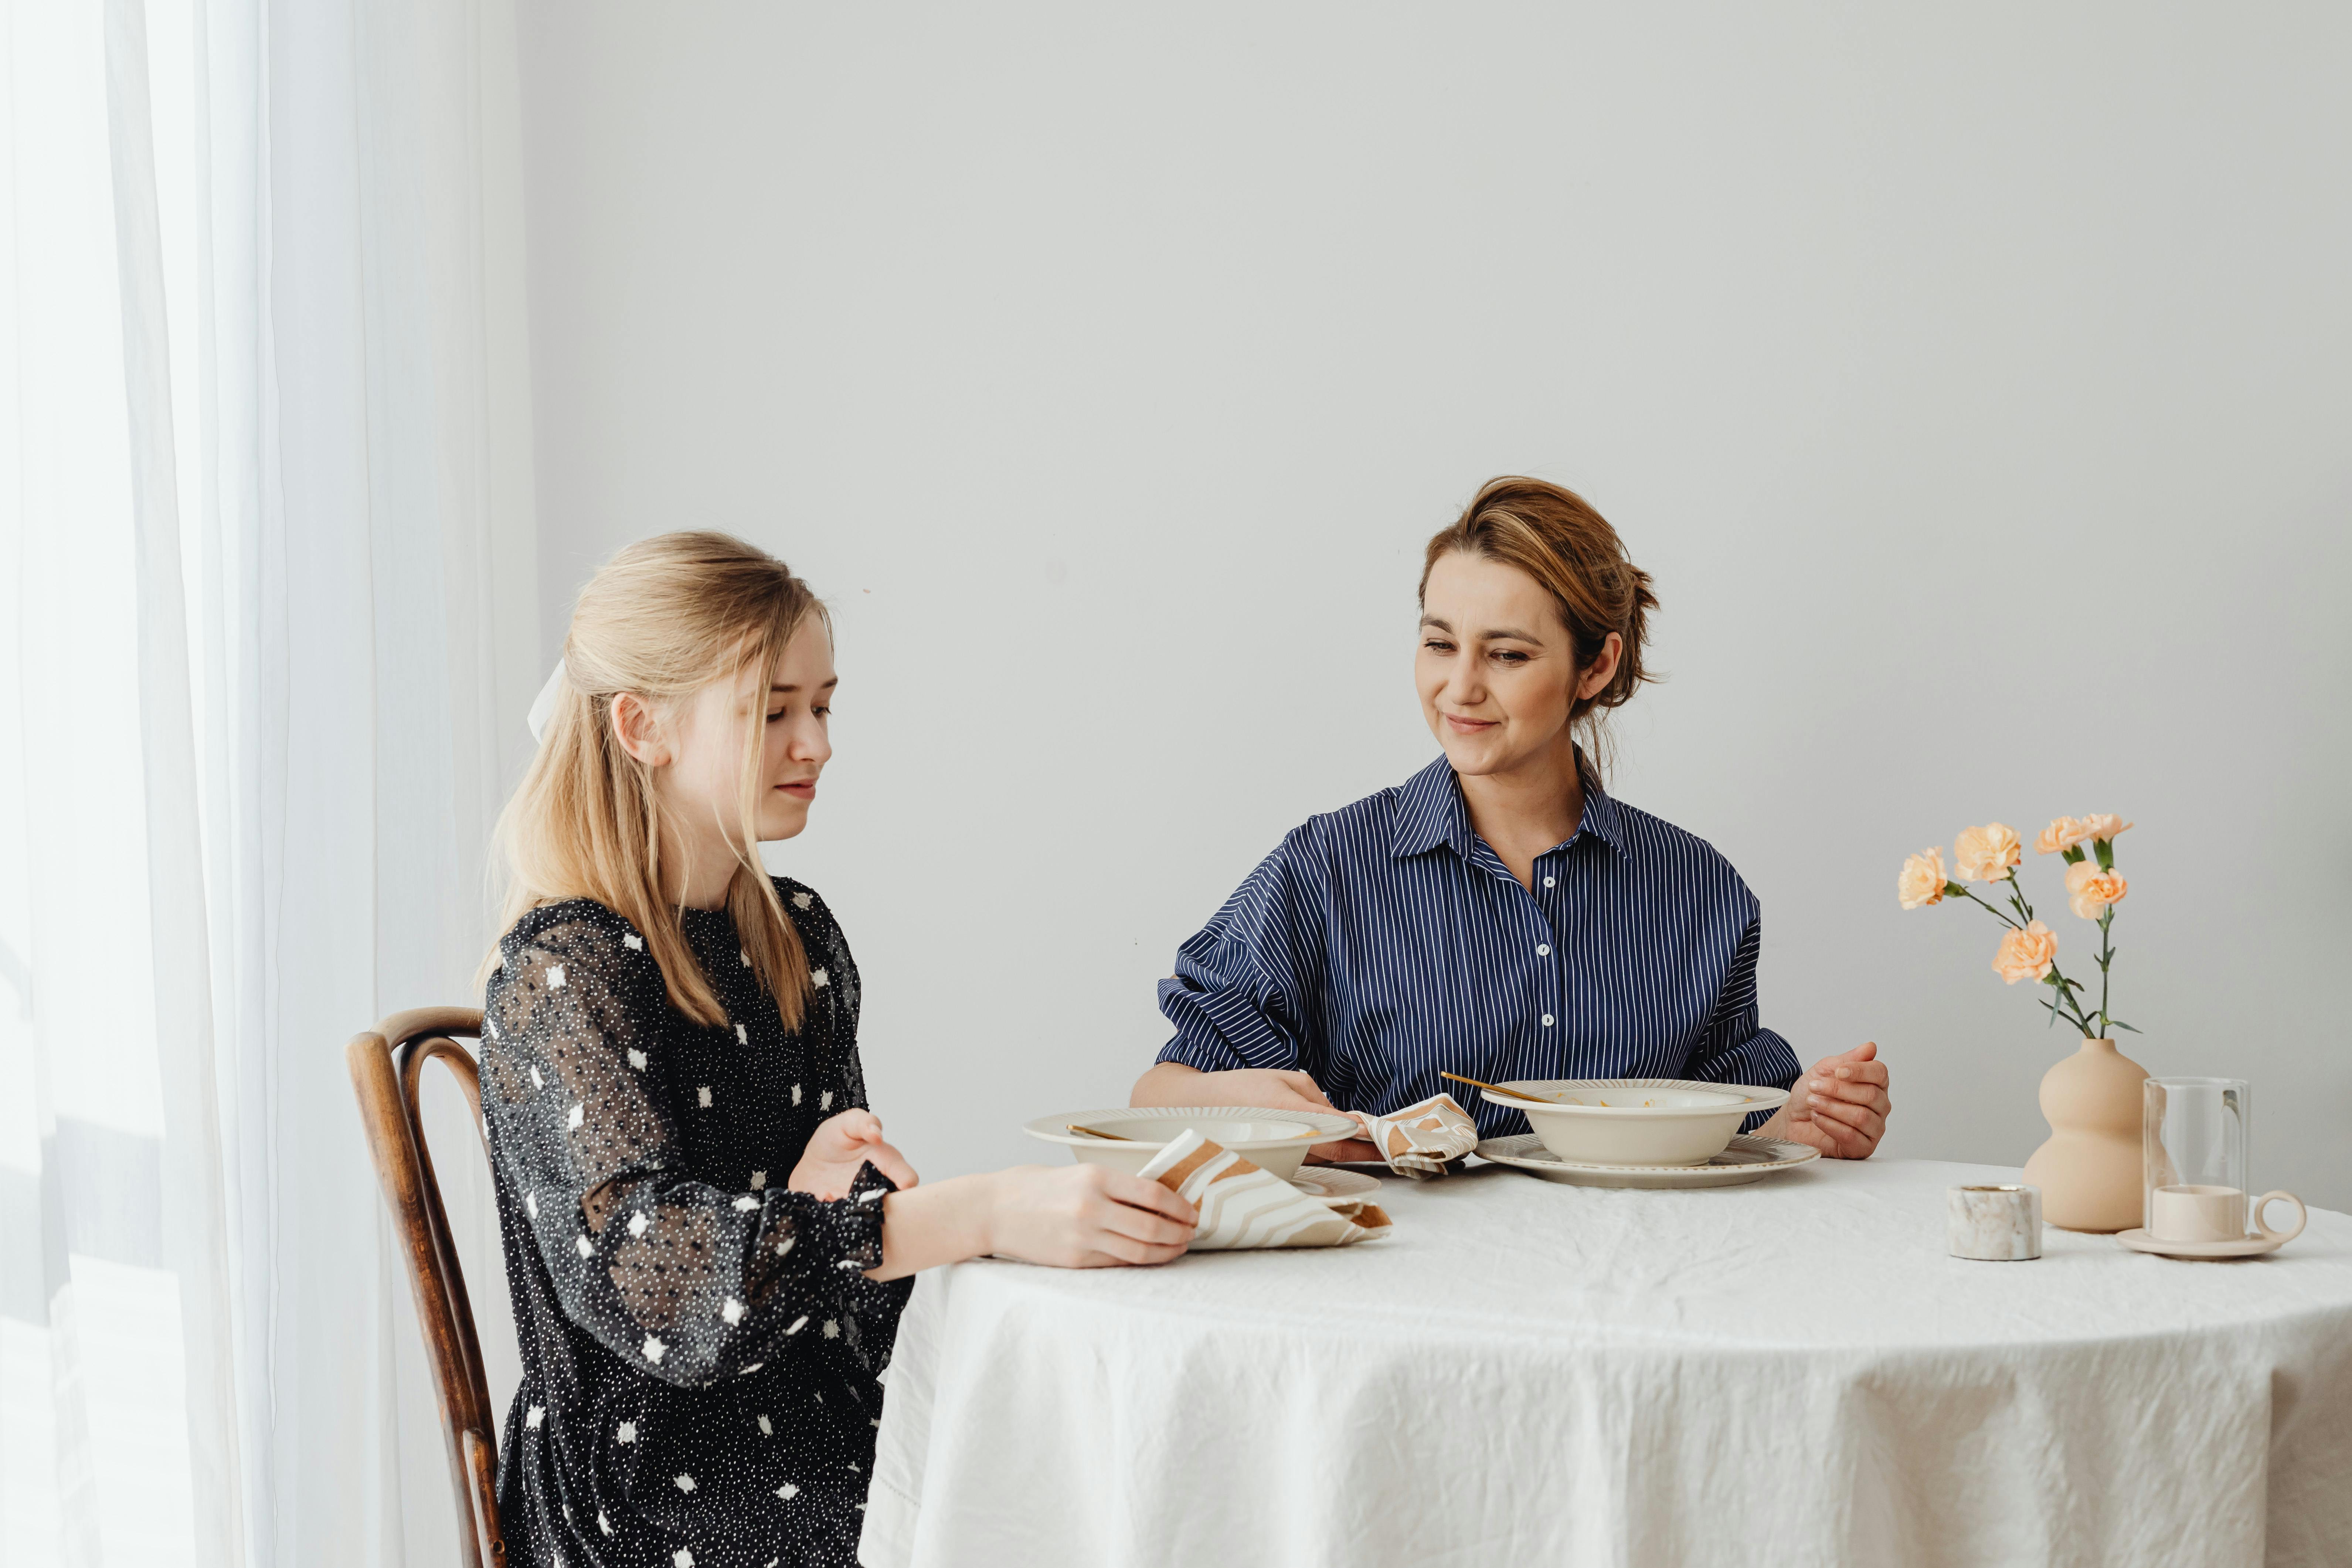 Two women dining | Source: Pexels